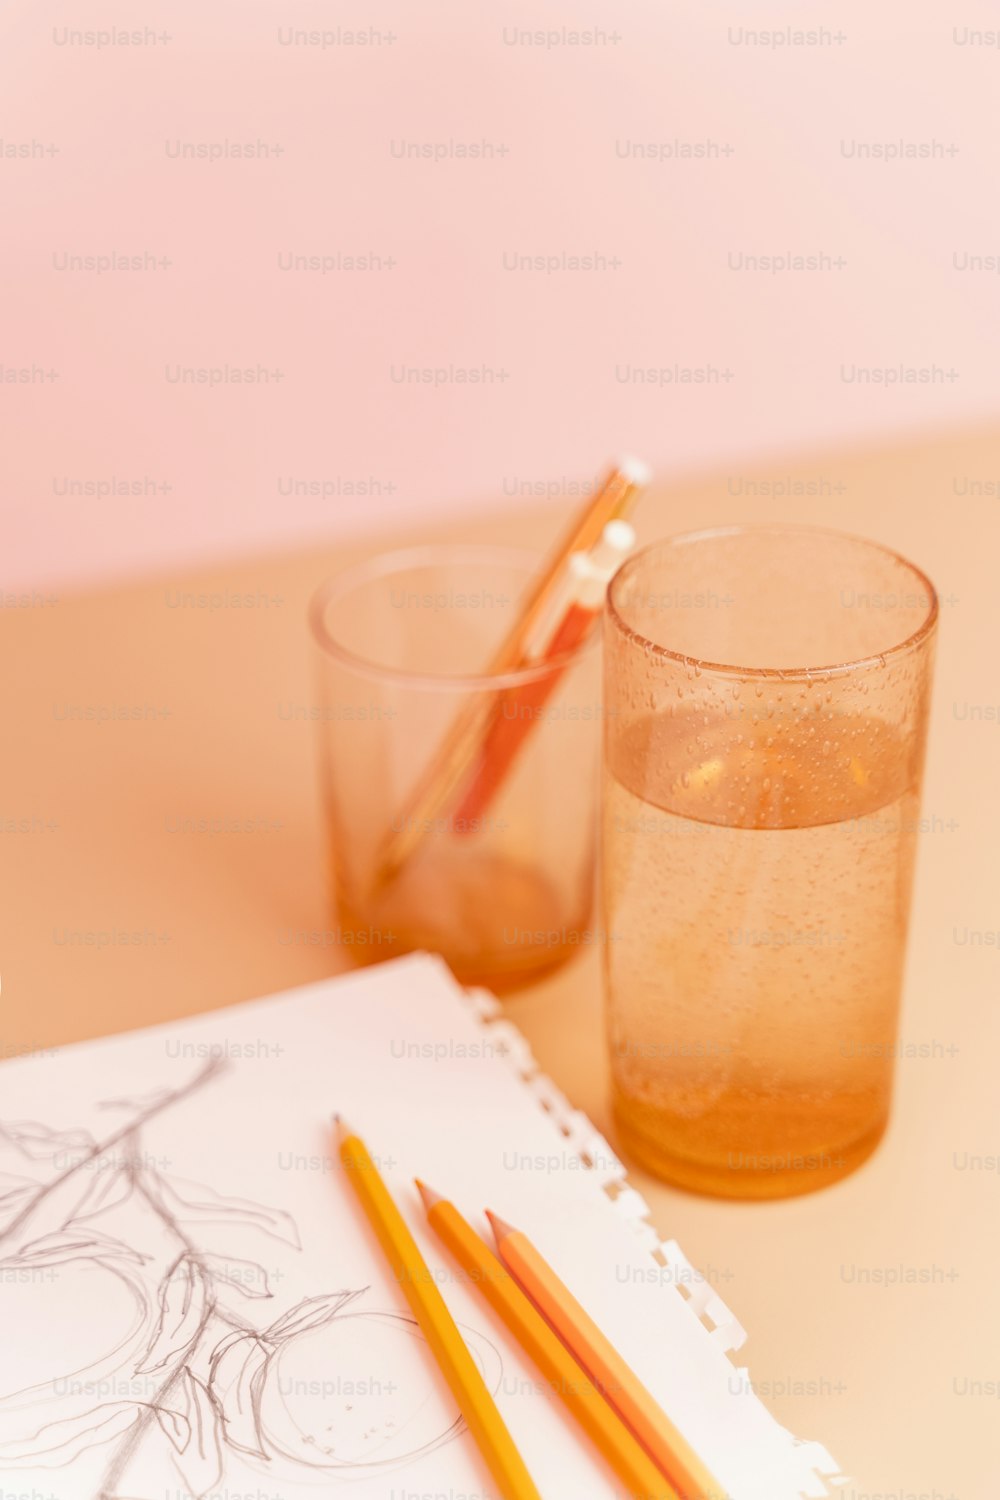 a pencil and a glass of water on a table